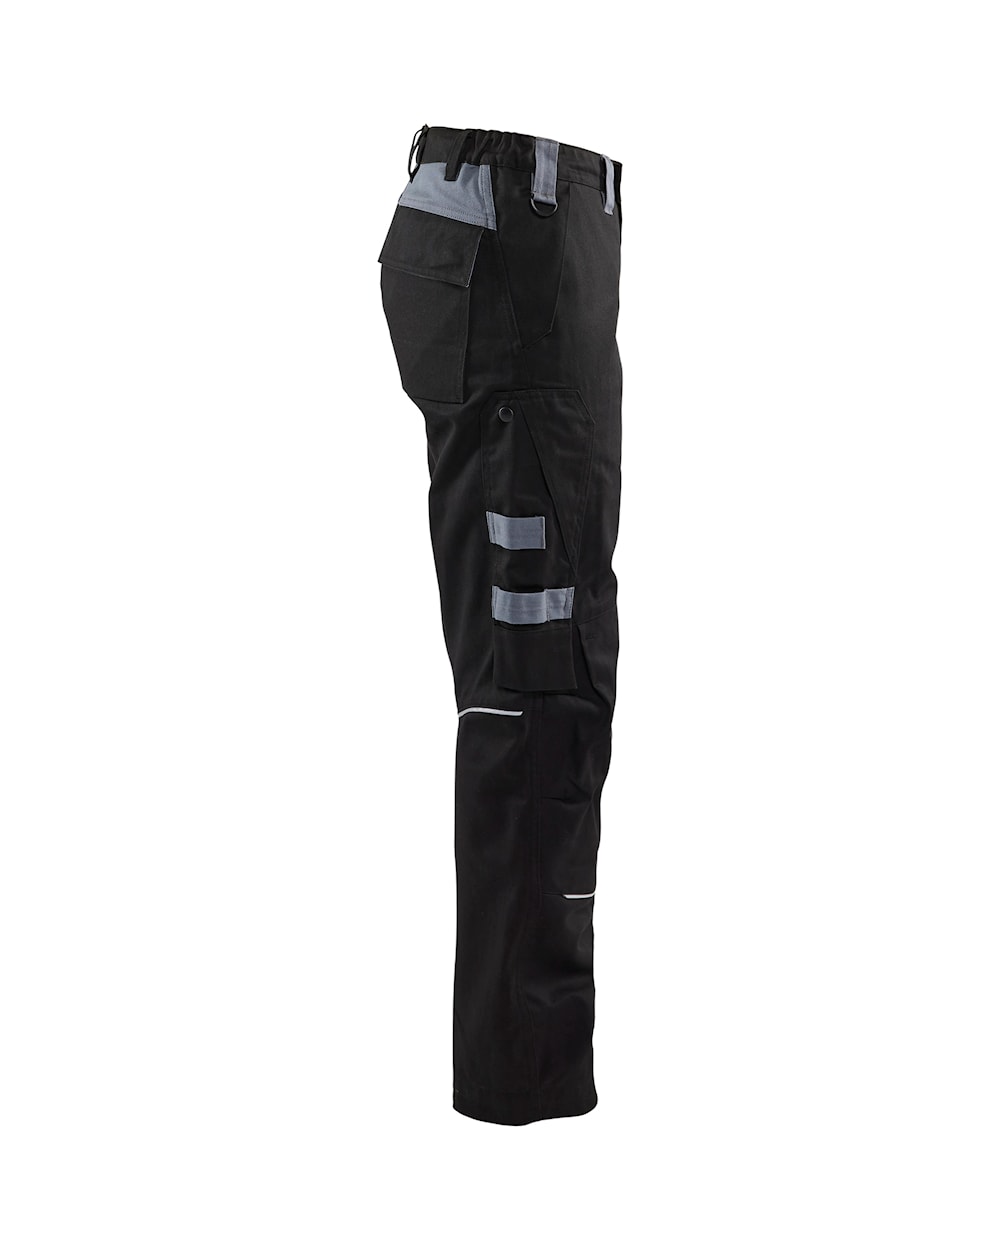 Blaklader Flame Resistant Trousers Women 7173